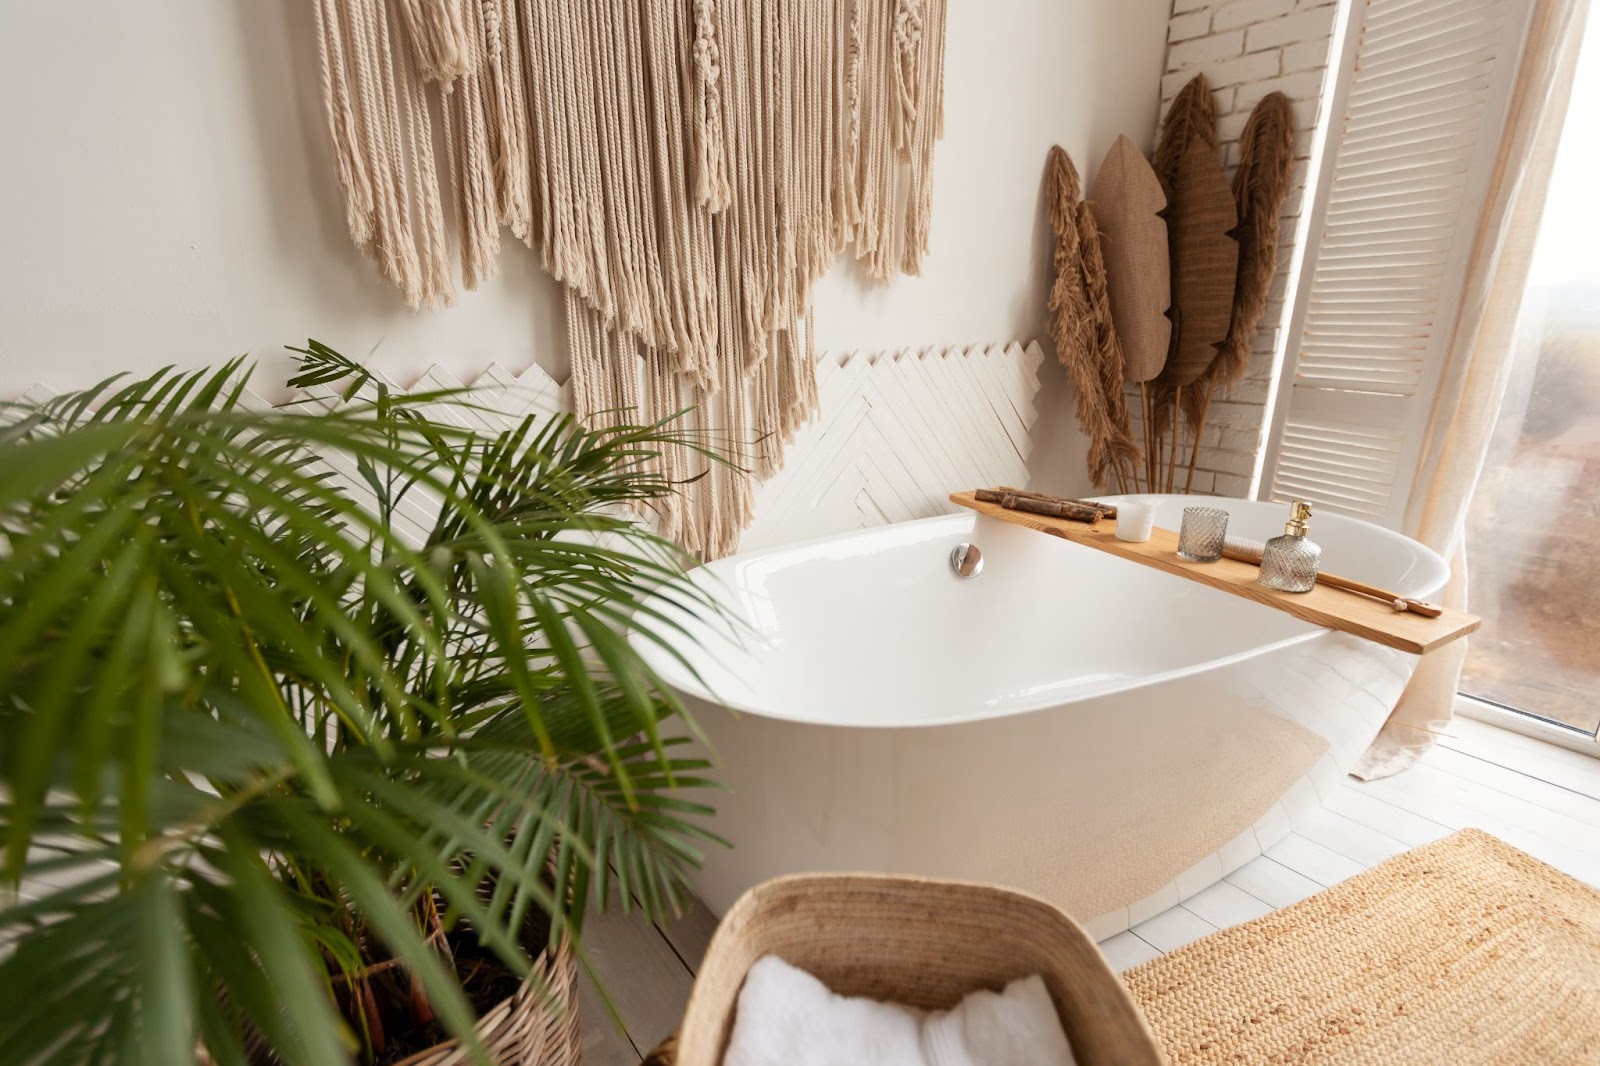 A warm and inviting bathroom interior showcasing a large bathtub, fresh and artificial plants, and rustic hanging decor for a cozy ambiance.